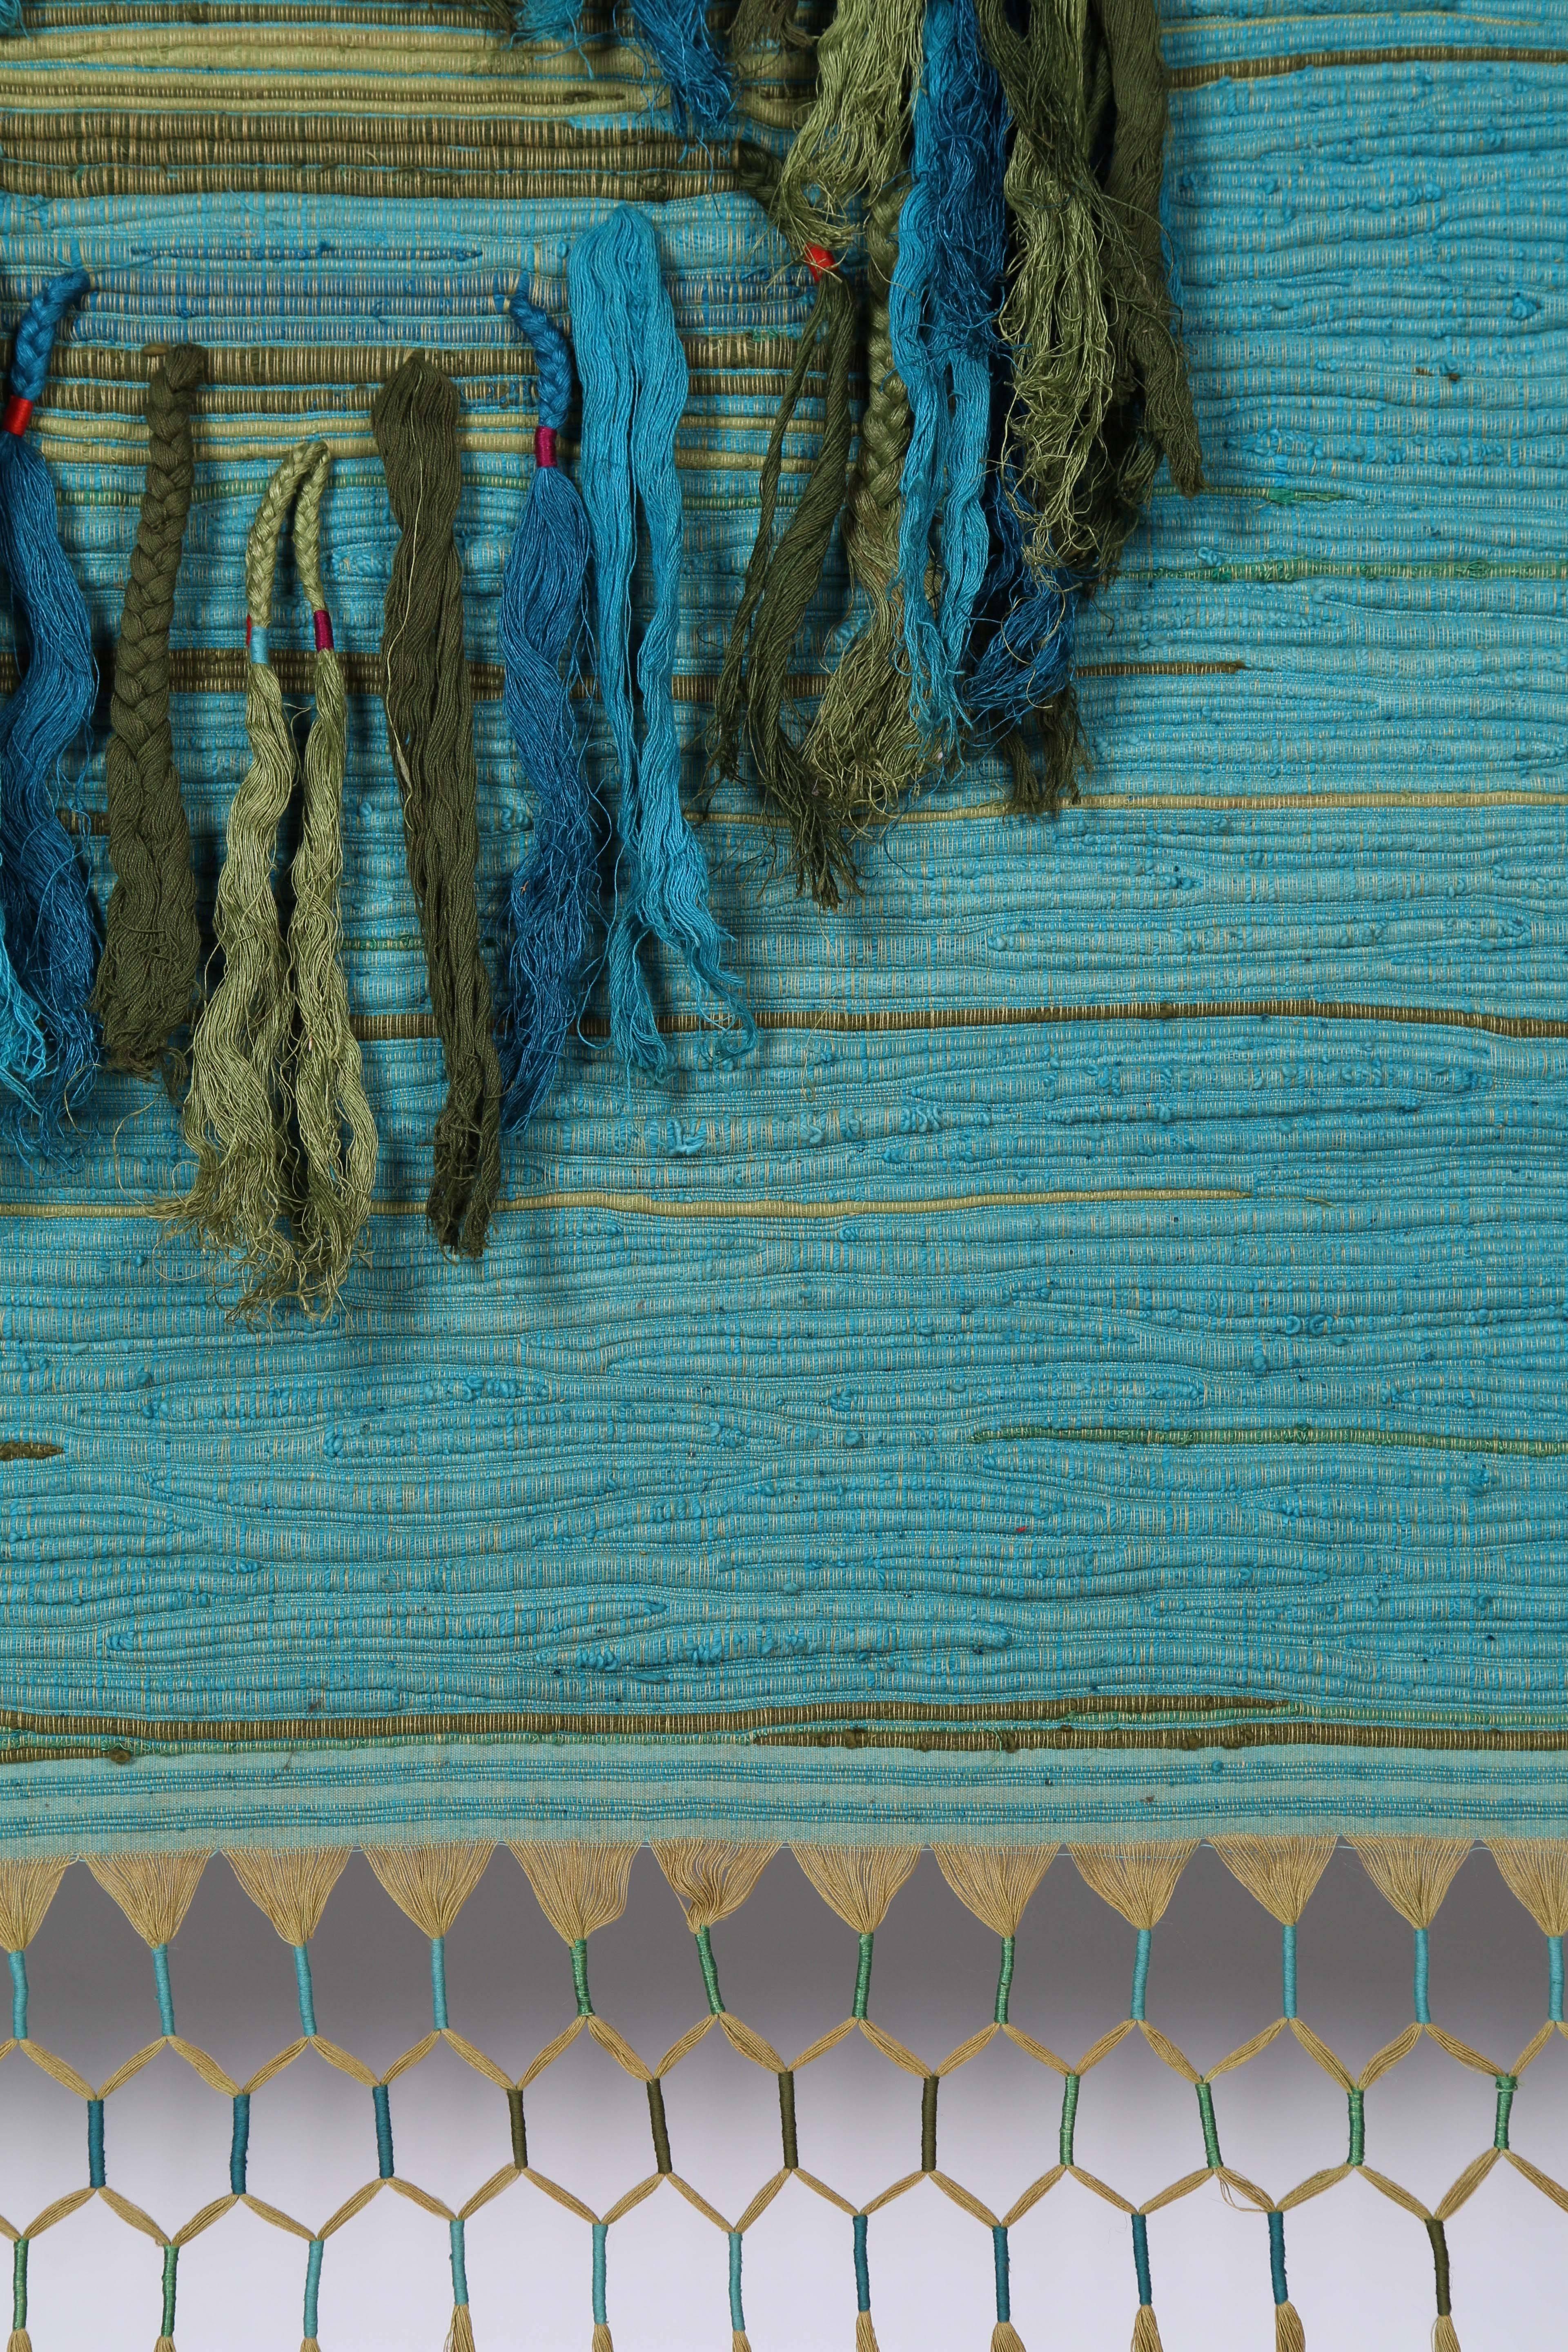 Mid-Century Modern Sheila Hicks, Palghat Tapestry, India, 1966